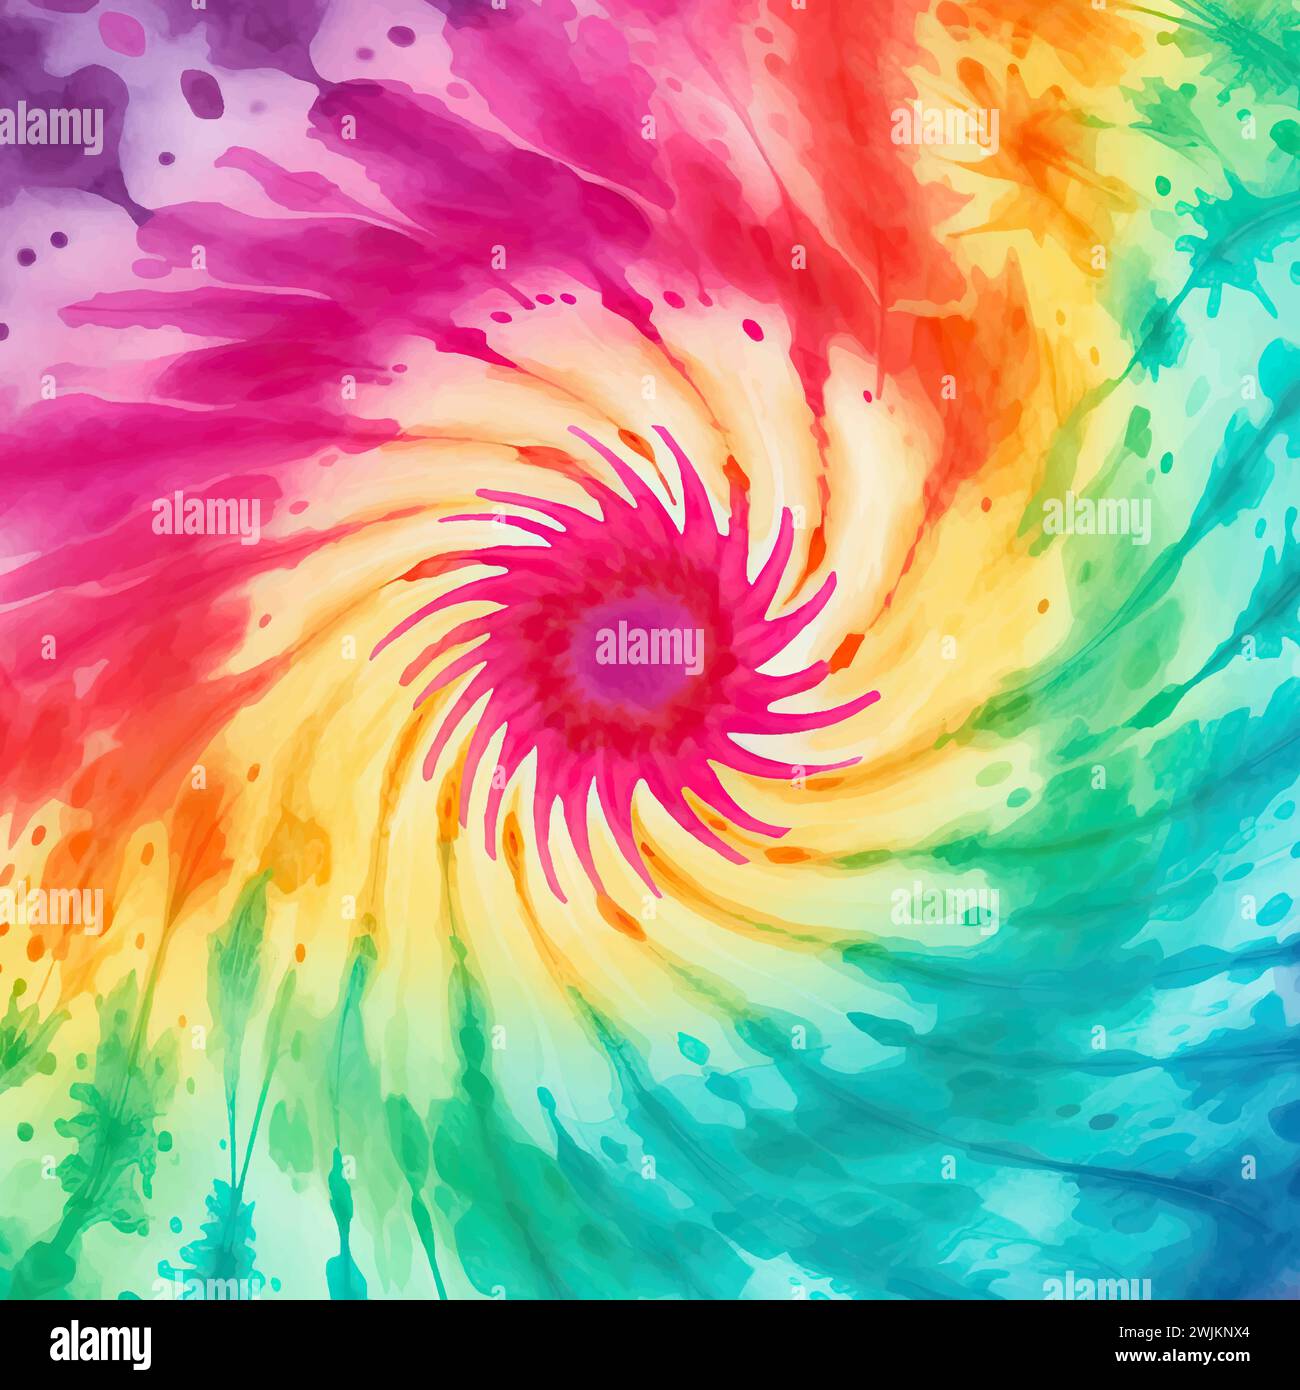 Abstract rainbow coloured tie dye pattern Vector Image